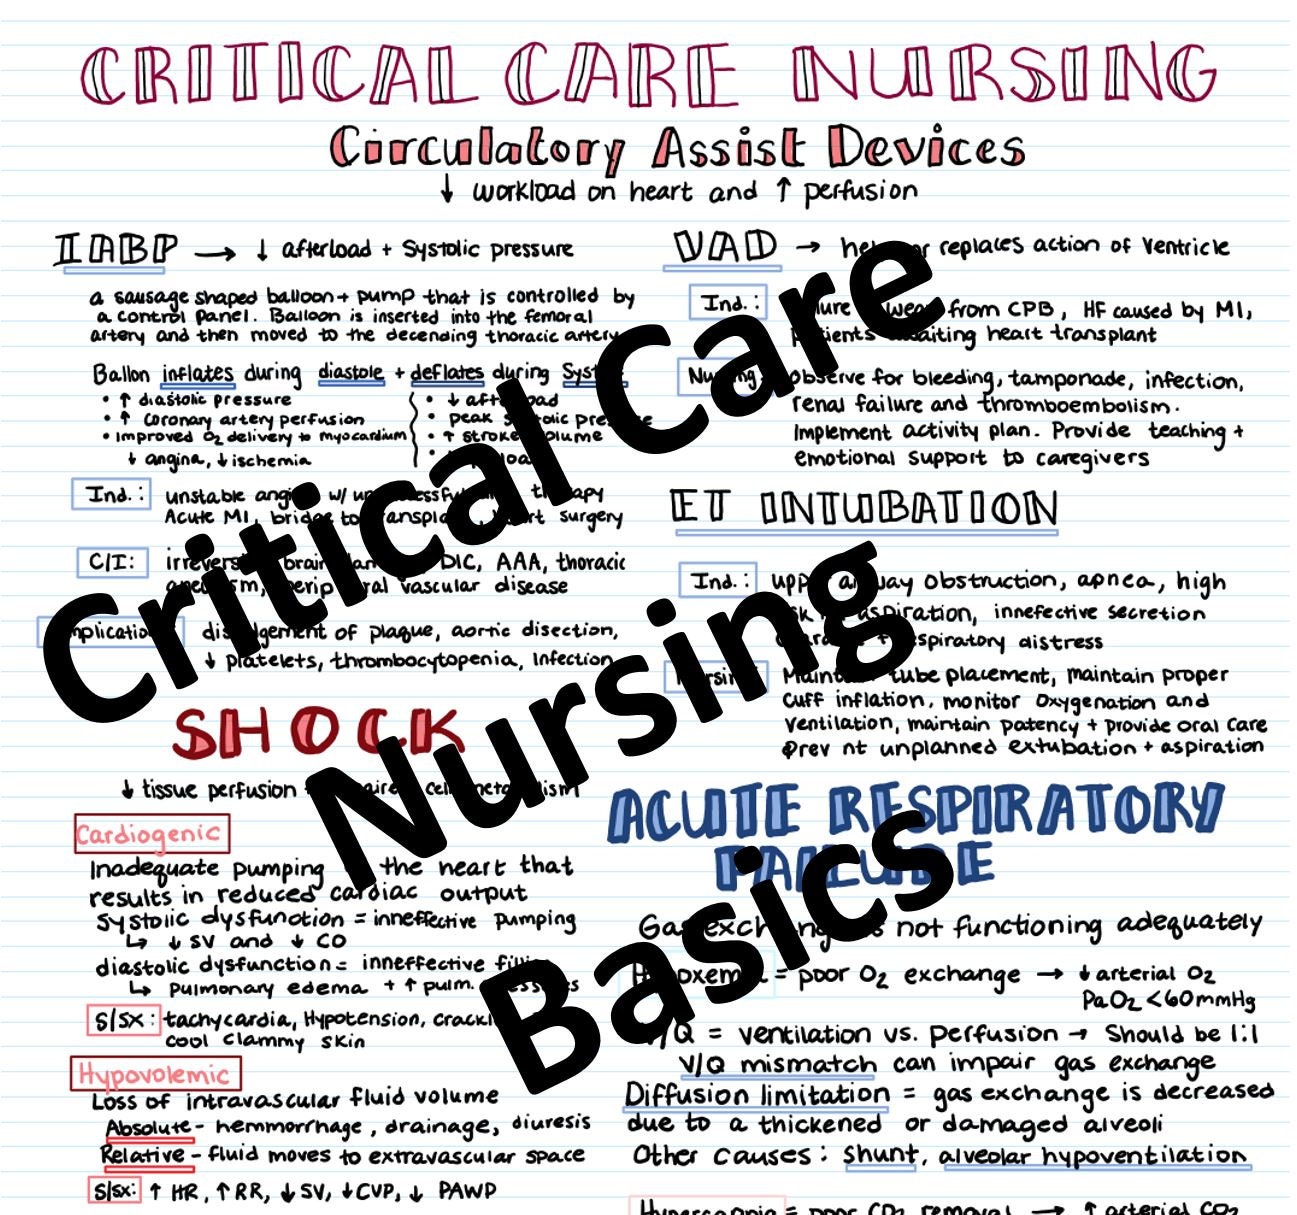 advanced practice in critical care a case study approach